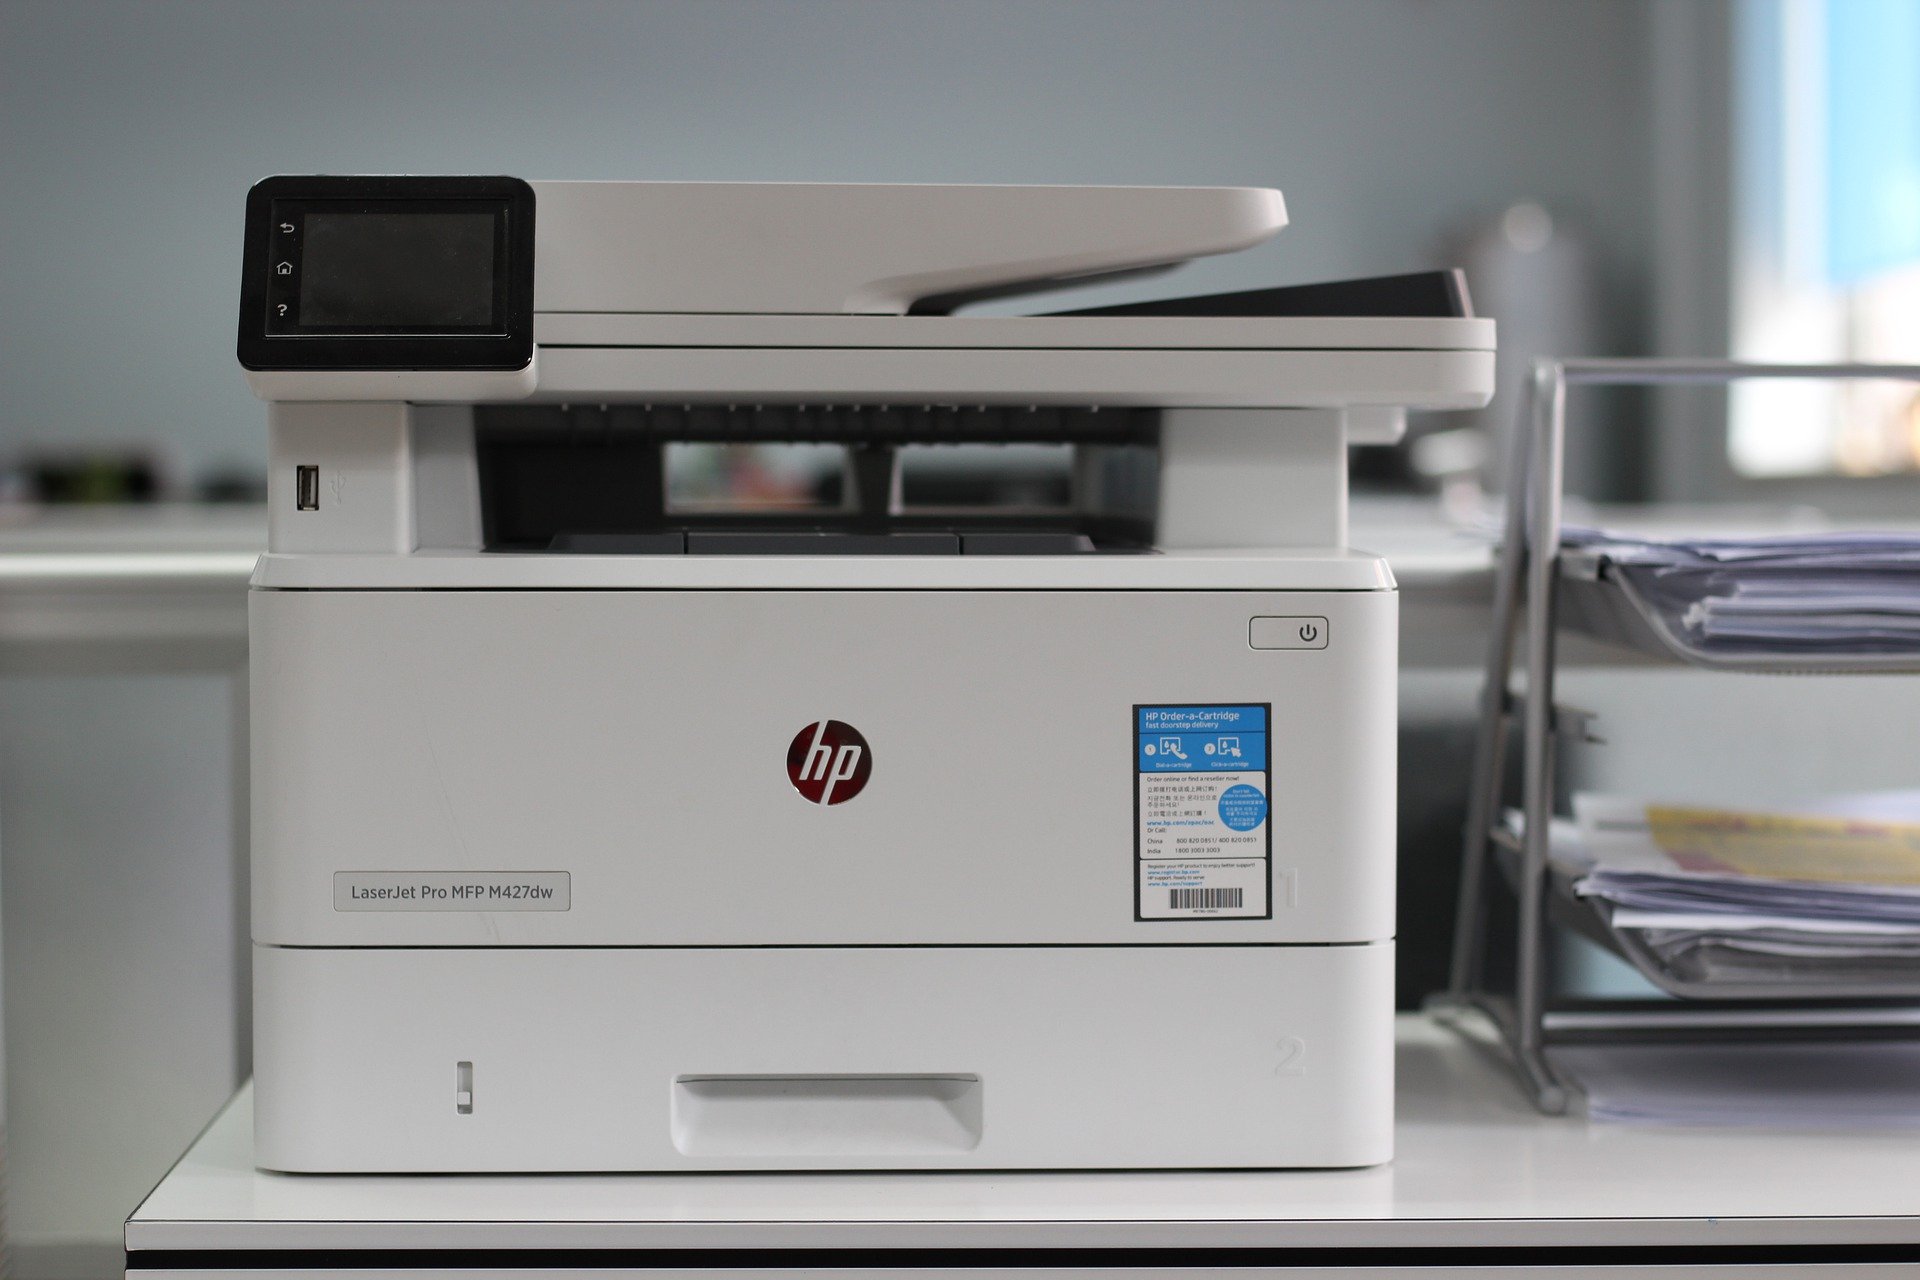 Easy And Less Hassle Printer? Wireless Printer Suits Your Needs Better!